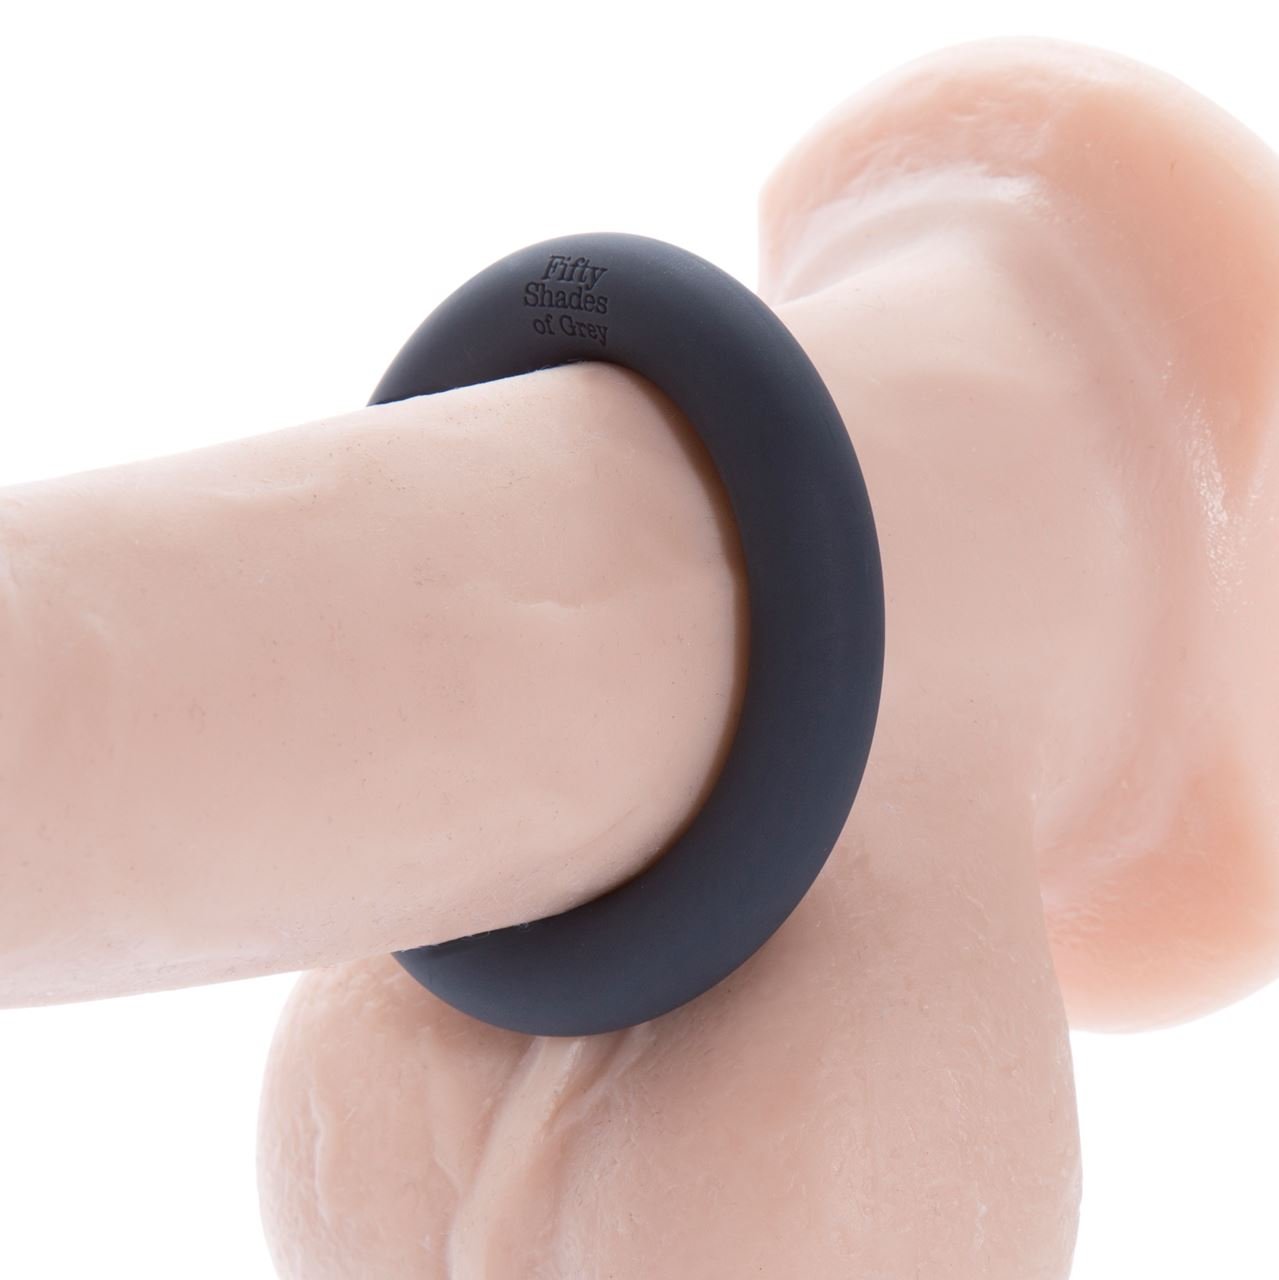 0014606_fifty-shades-of-grey-a-perfect-o-silicone-love-ring_pmjejx7trlbvmqkf.jpeg